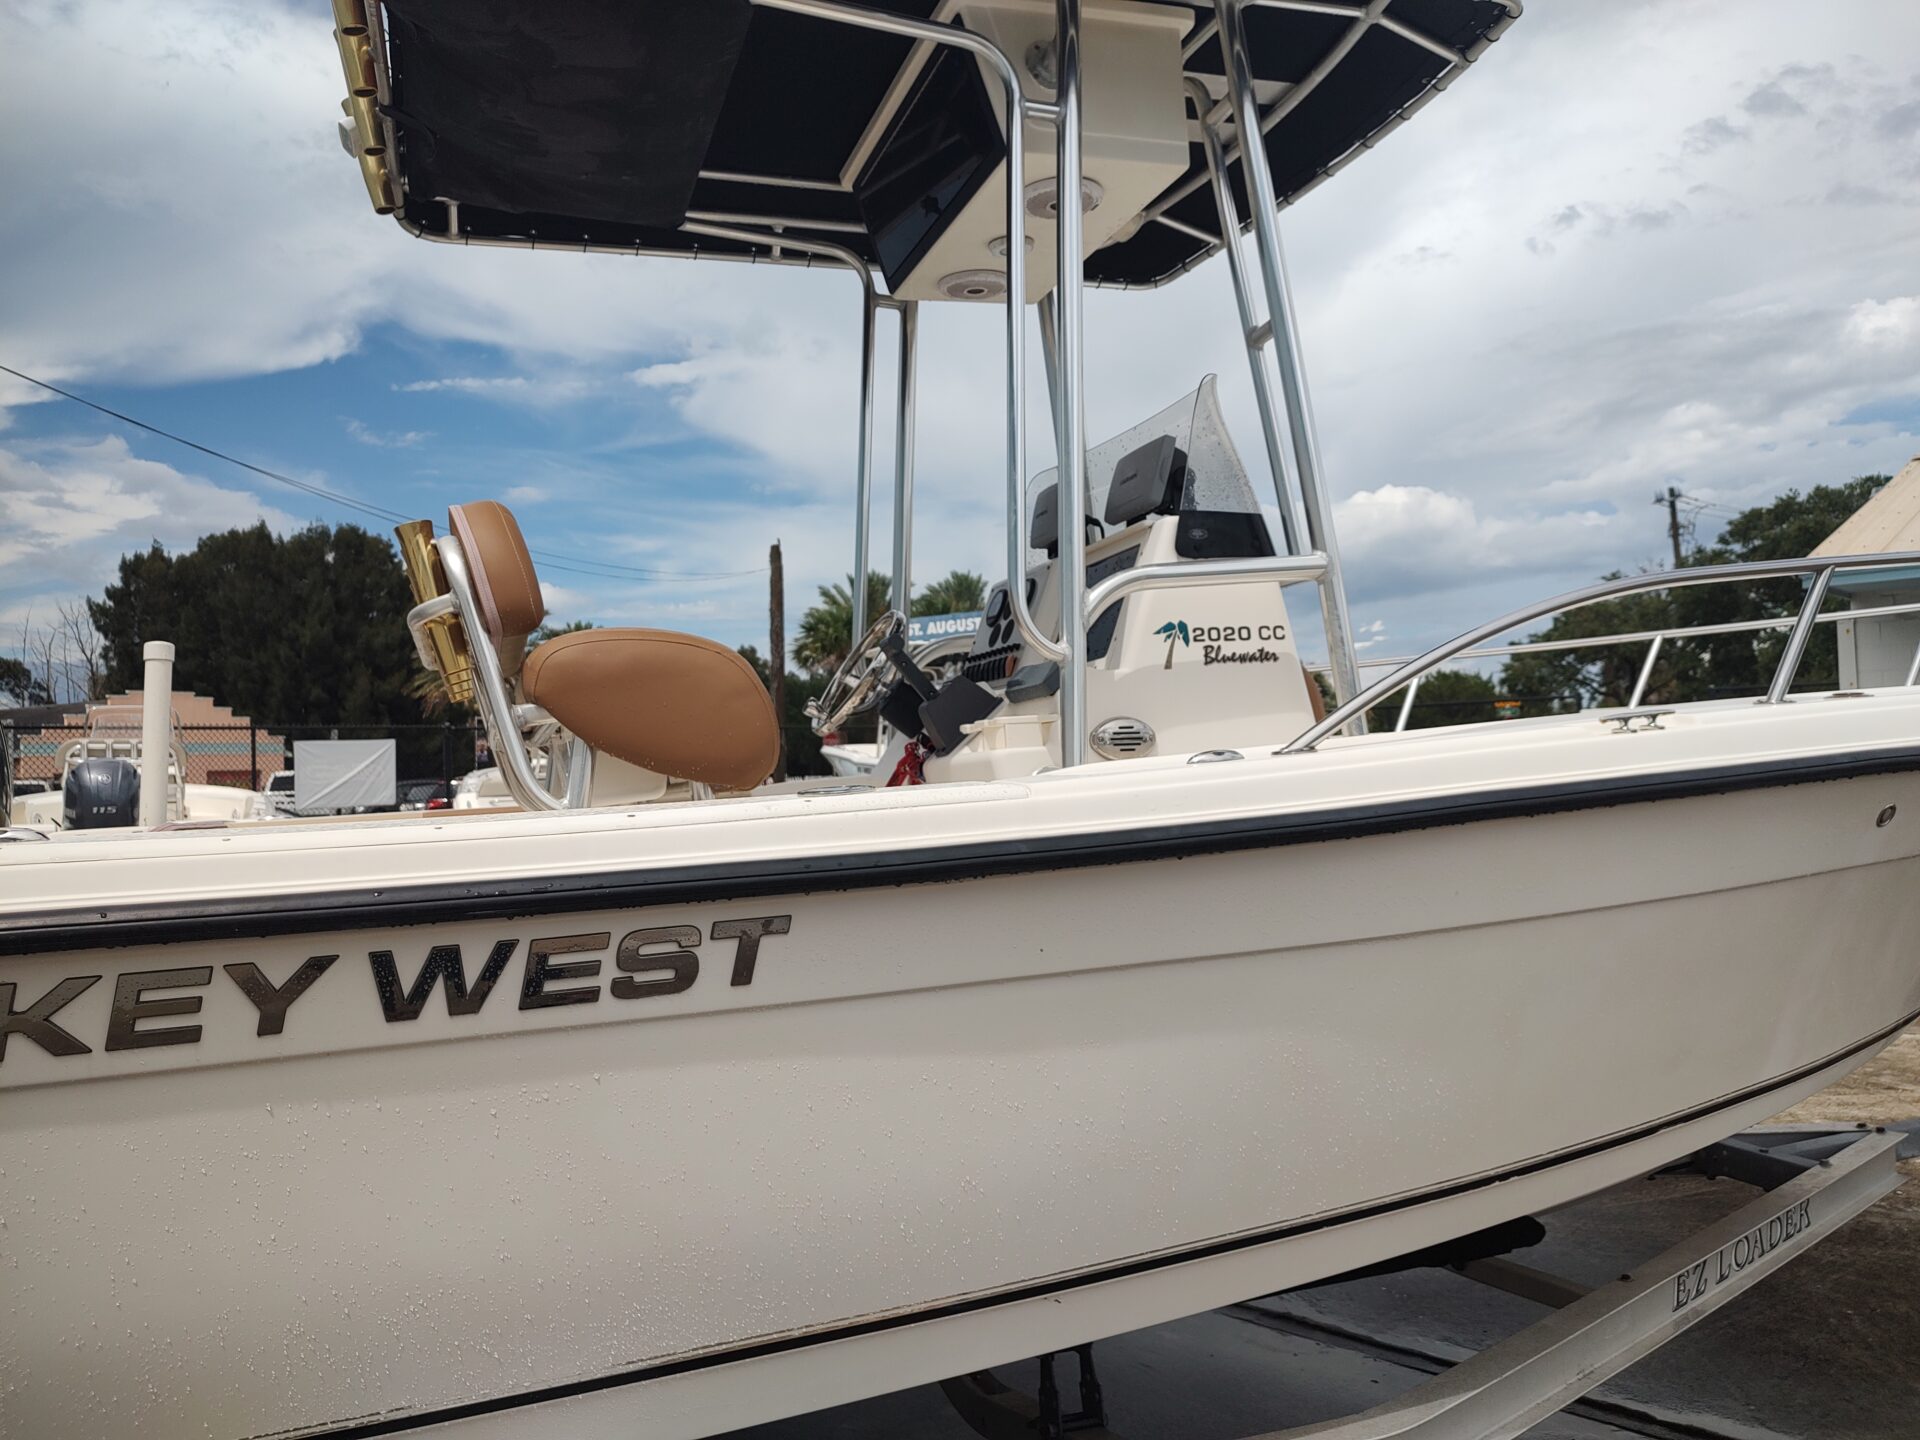 Key West, Used boats for sale, pre-owned, personal watercraft, used boats with trailer